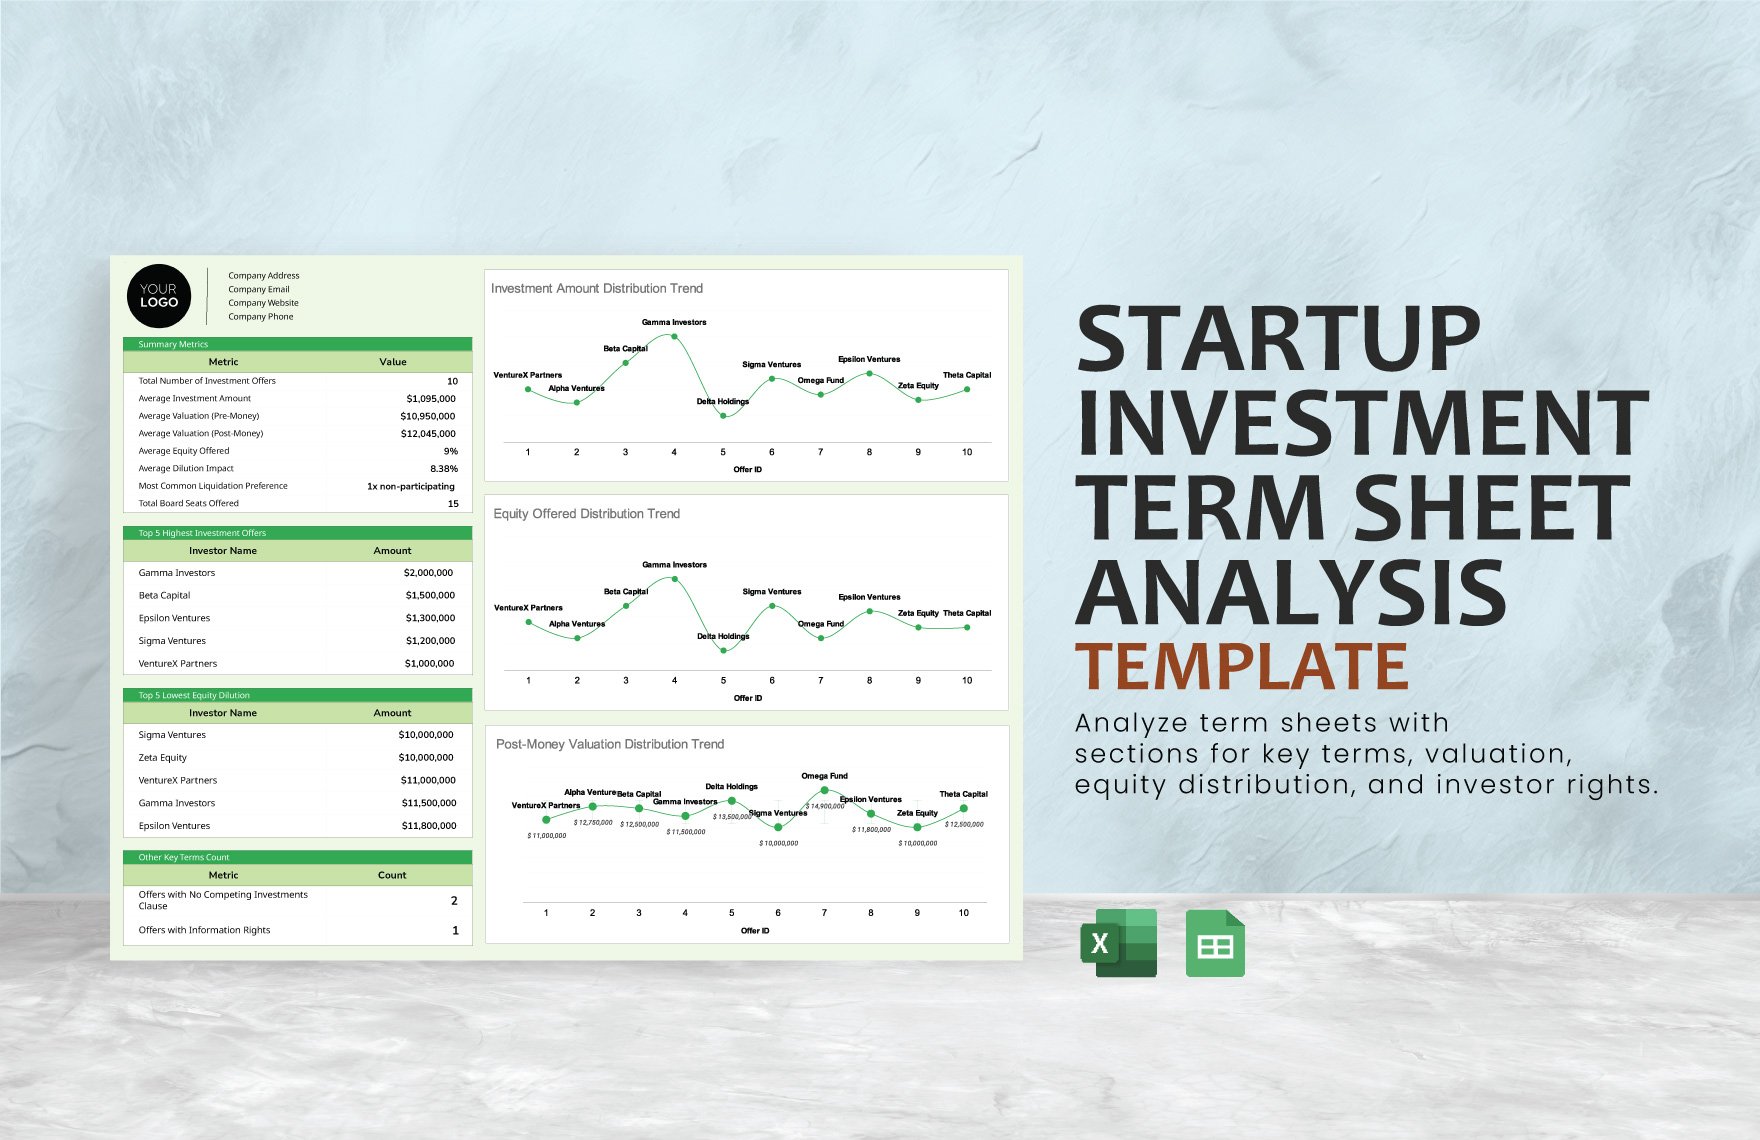 Startup Investment Term Sheet Analysis Template in Excel, Google Sheets